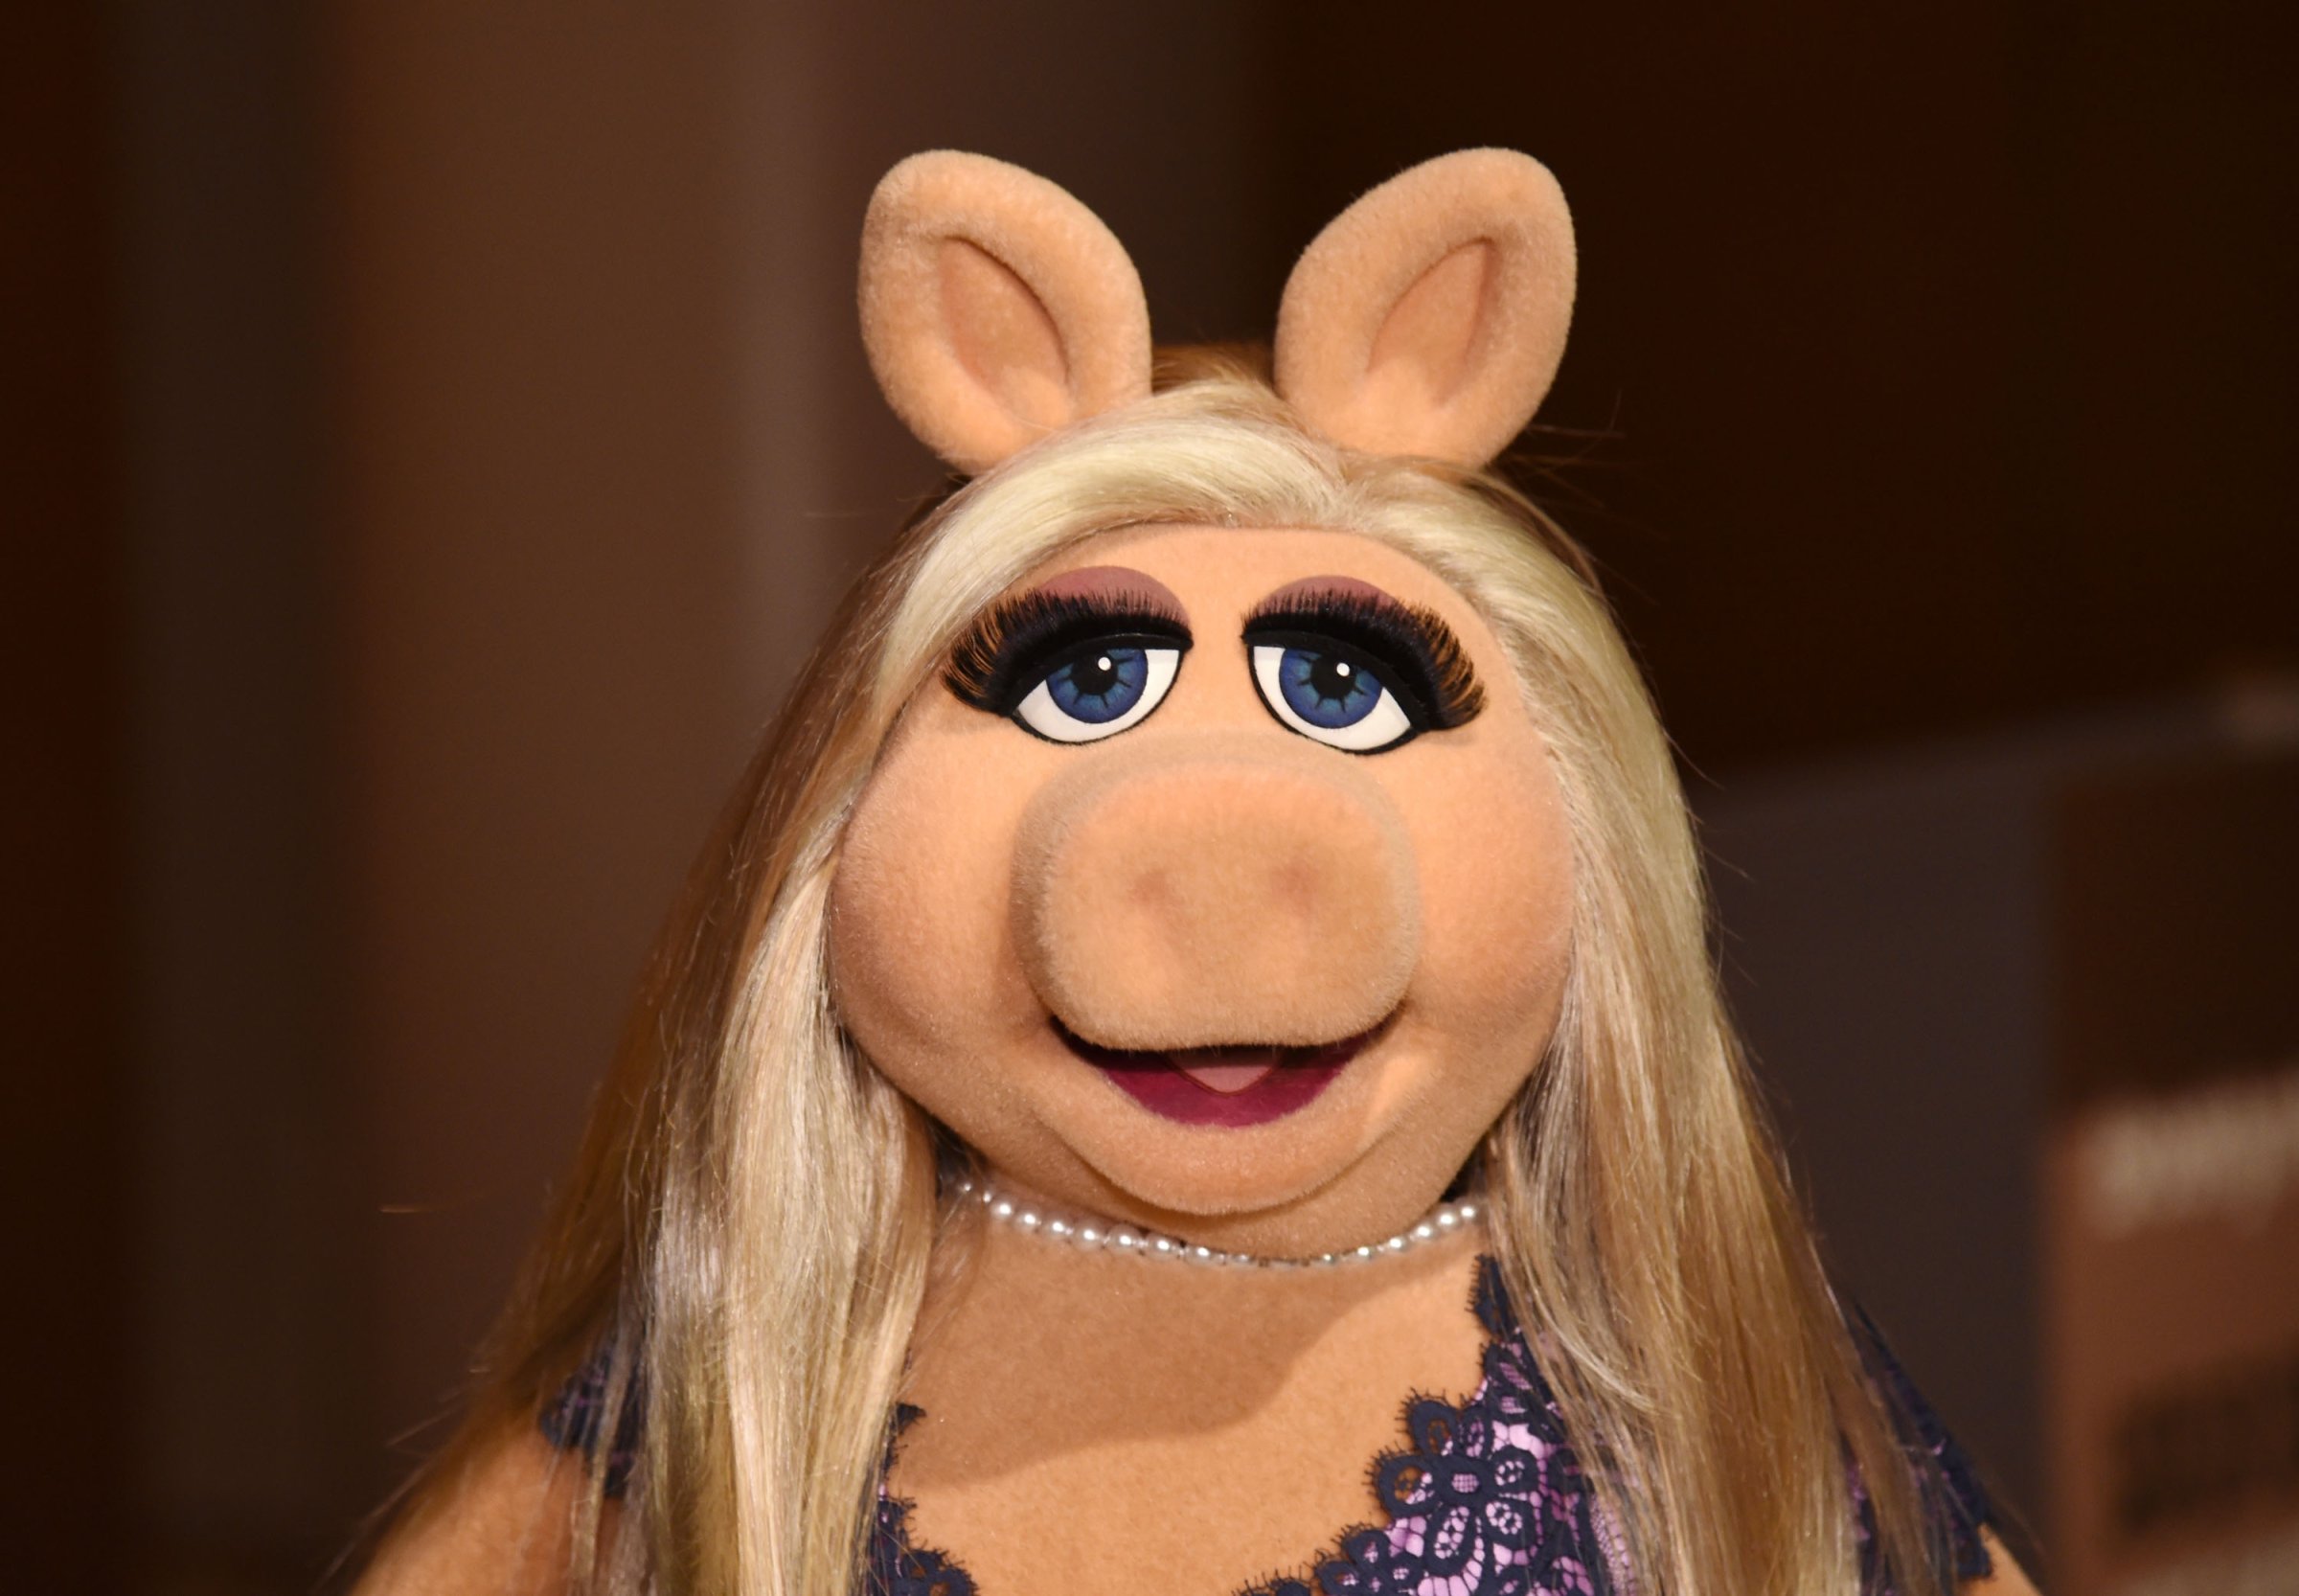 Miss PIggy at Brooklyn Museum's Sackler Center First Awards in New York City on June 4, 2015.